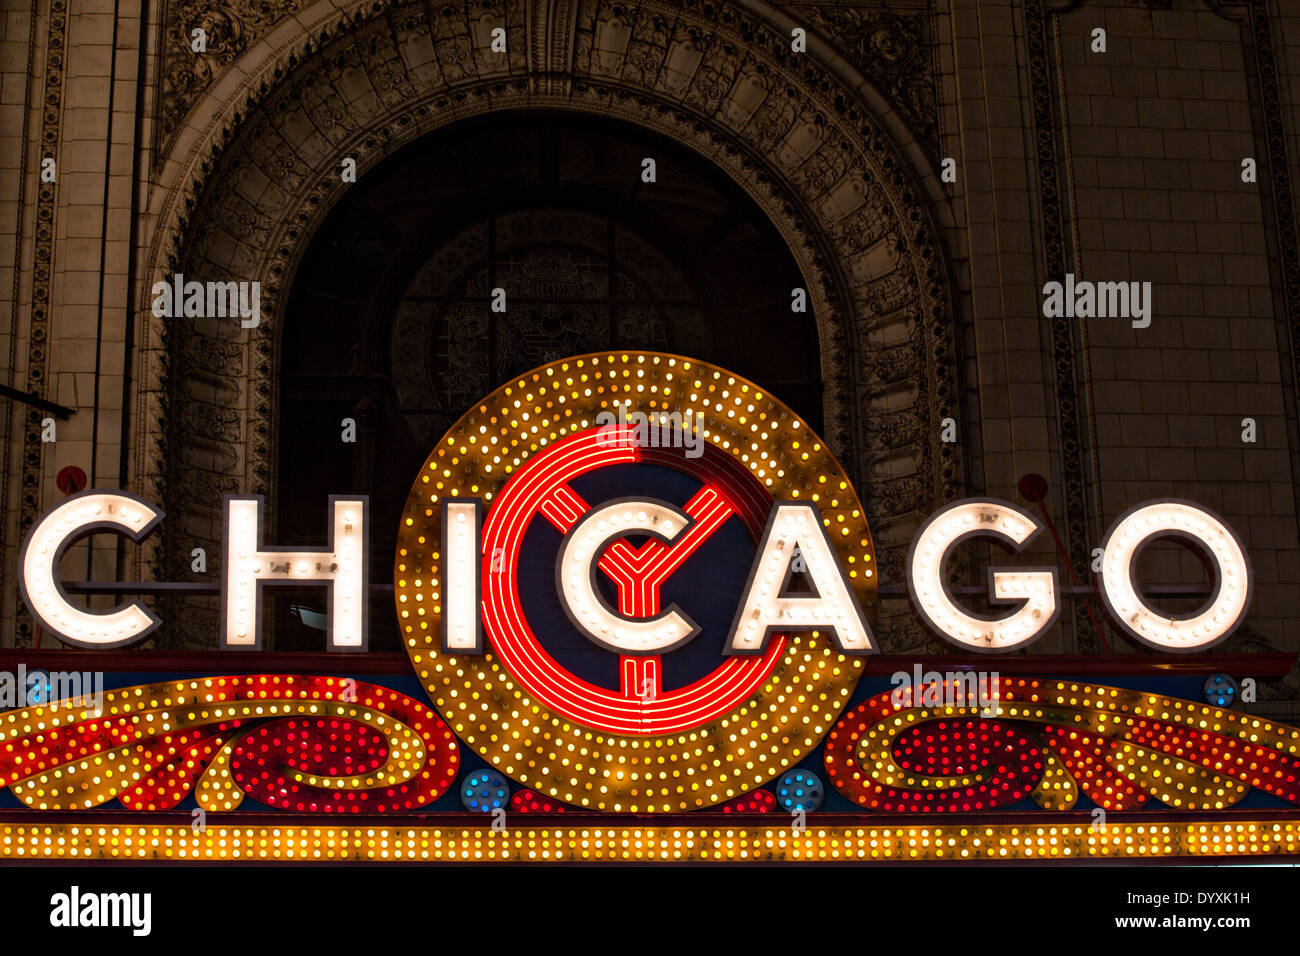 Neon sign at Chicago Theatre in Chicago, Illinois USA Stock Photo - Alamy